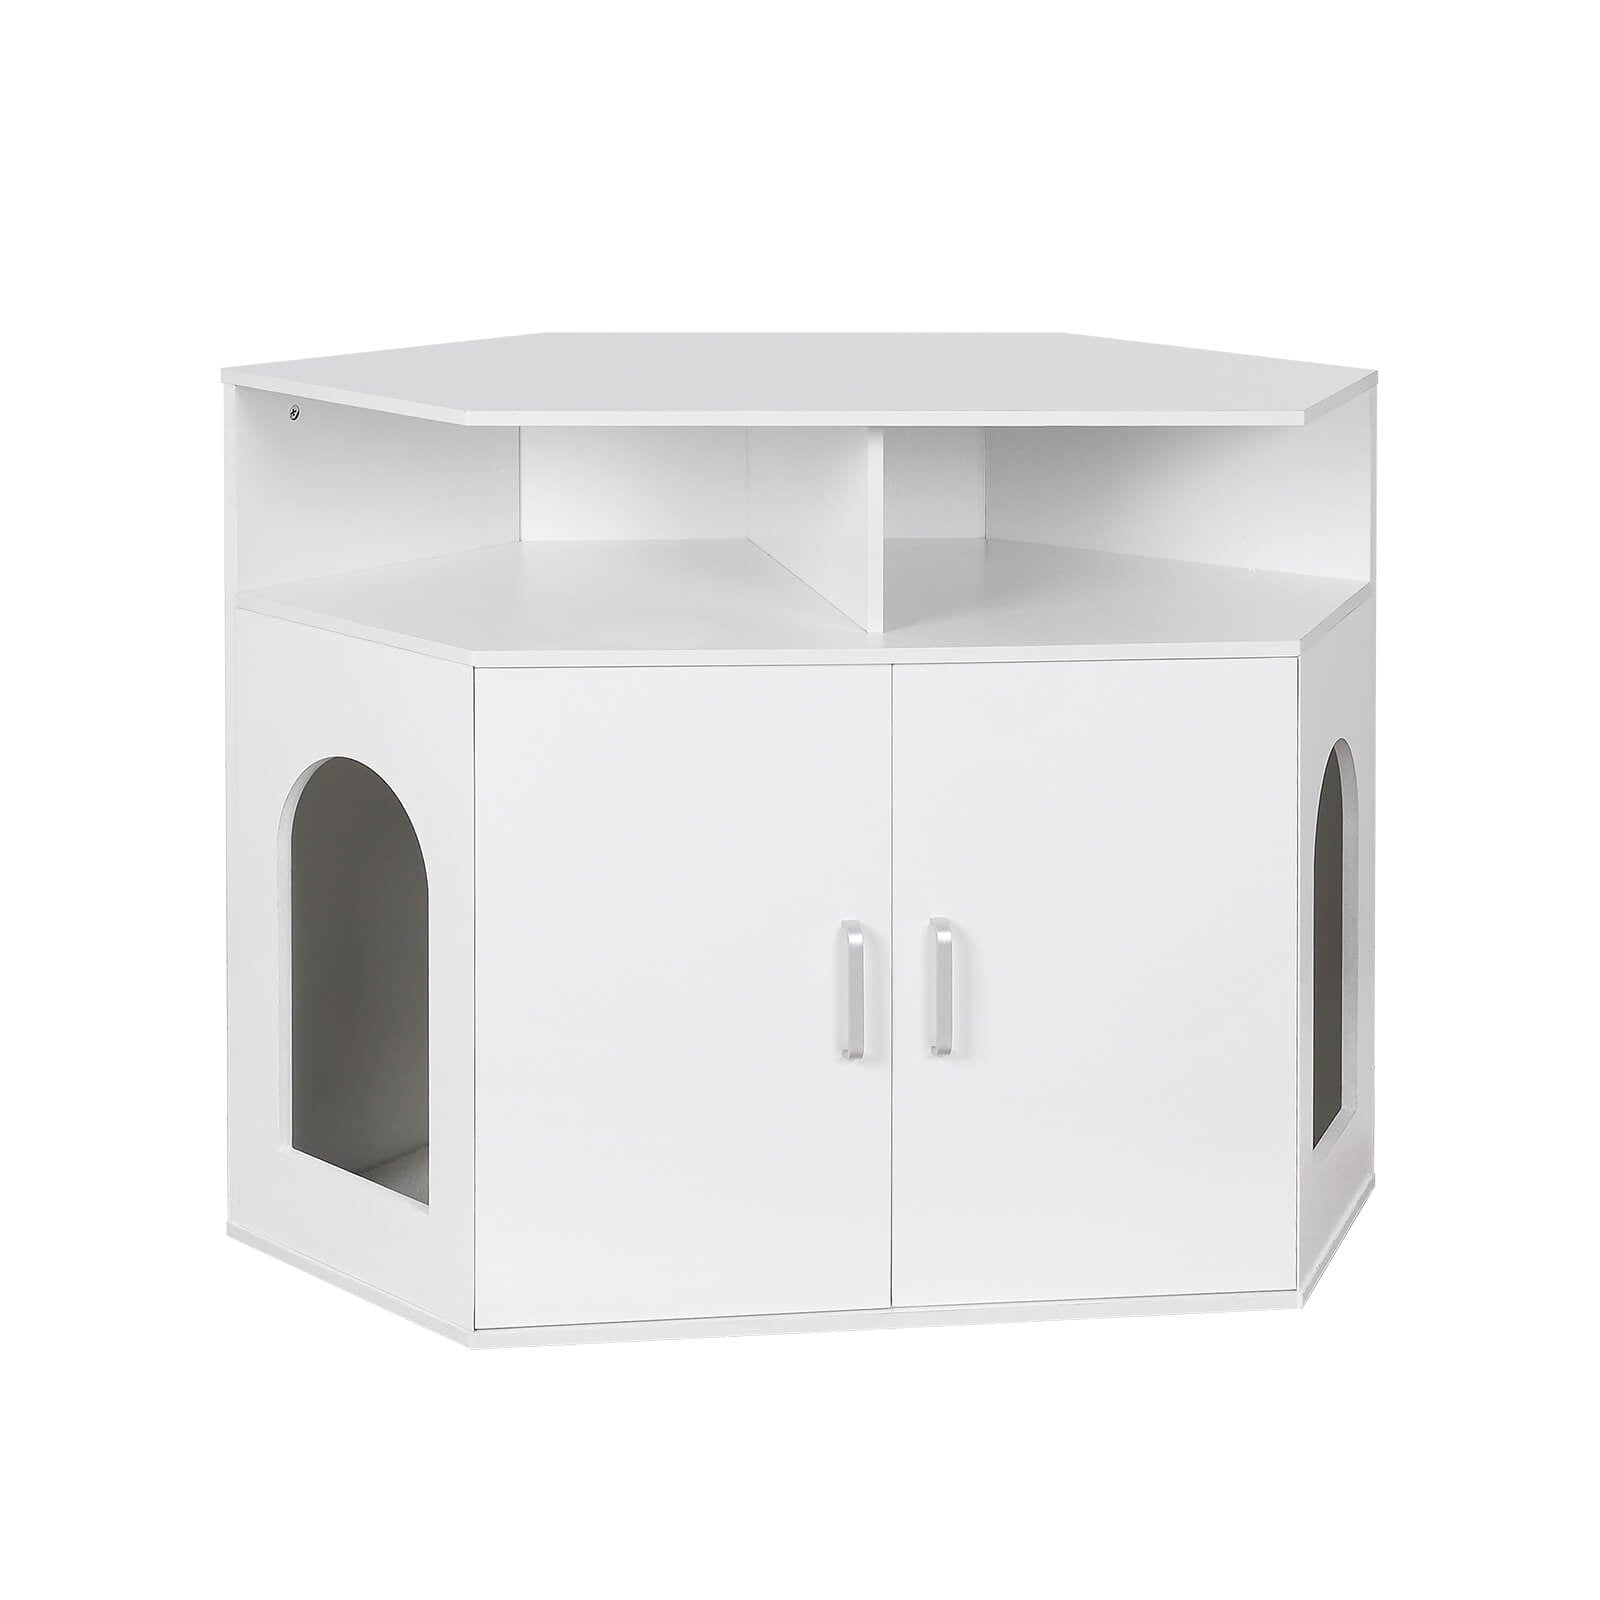 Elecwish Cat Box Cabinet with Double Doors and Open Shelf PF003 with white background